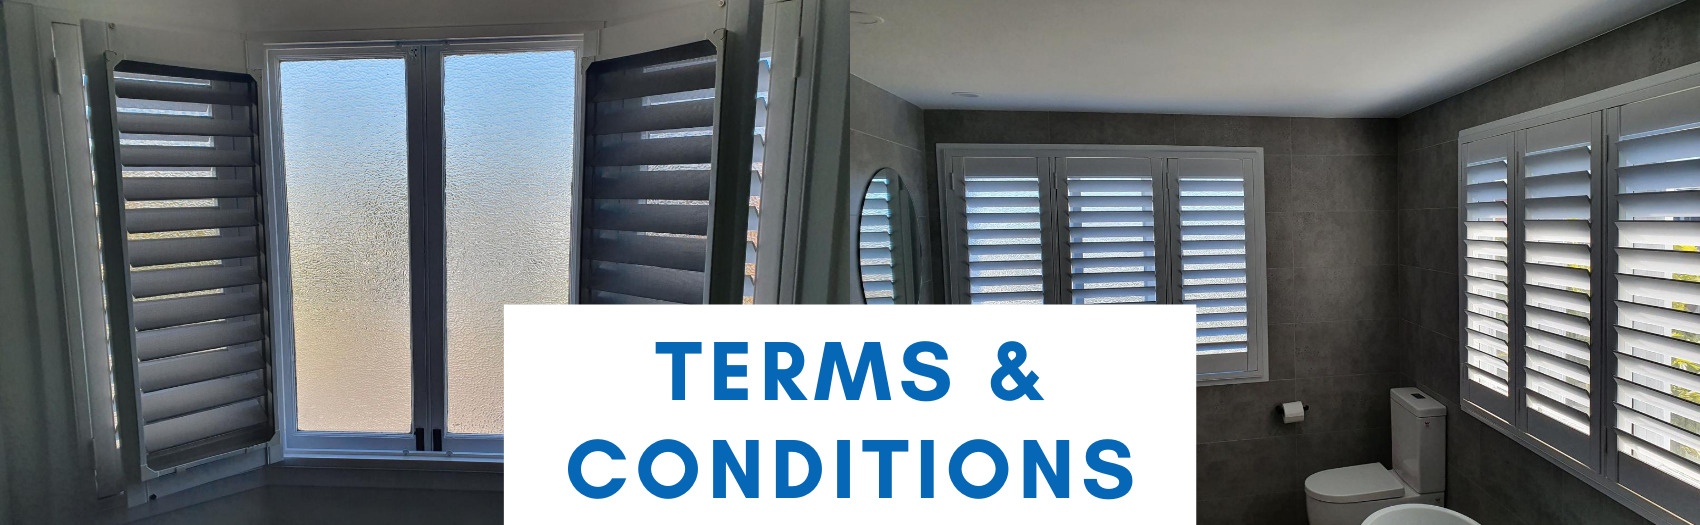 decor blinds terms and conditions